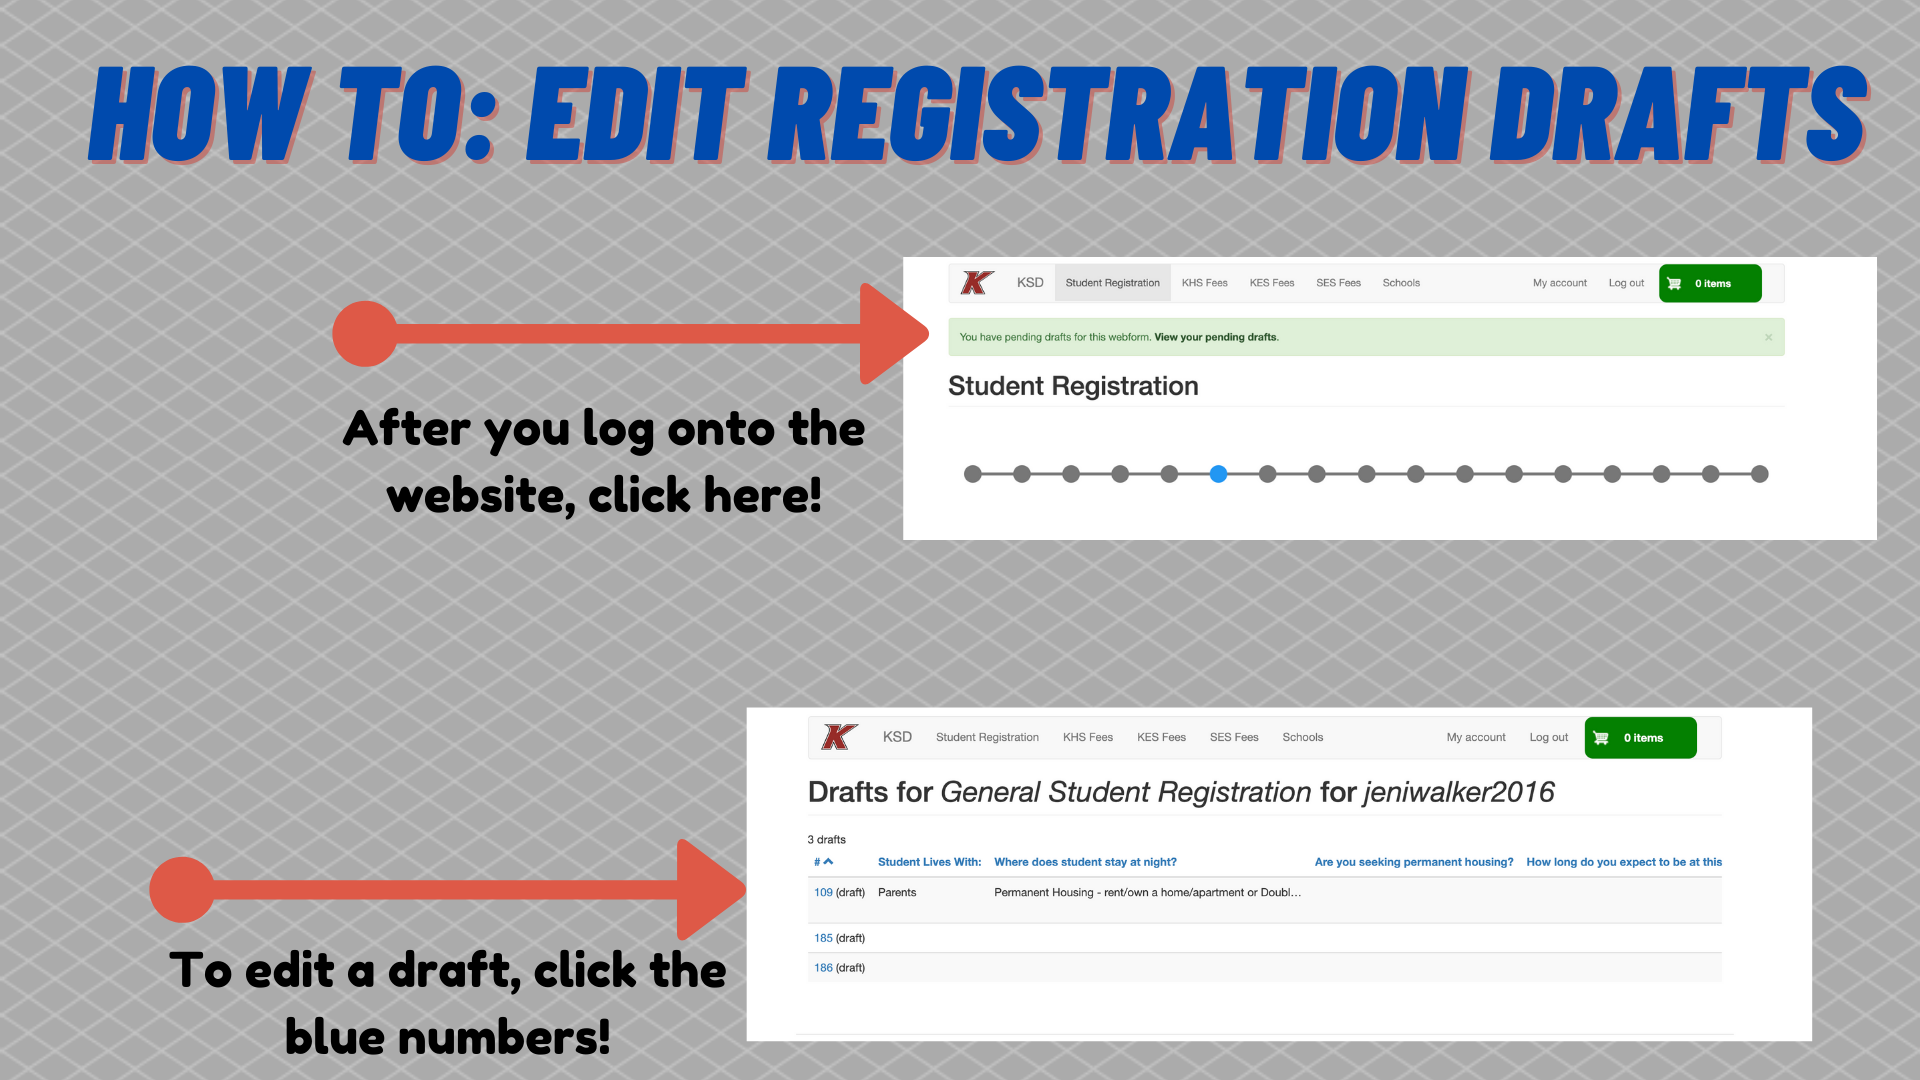 How to edit a draft for Registration